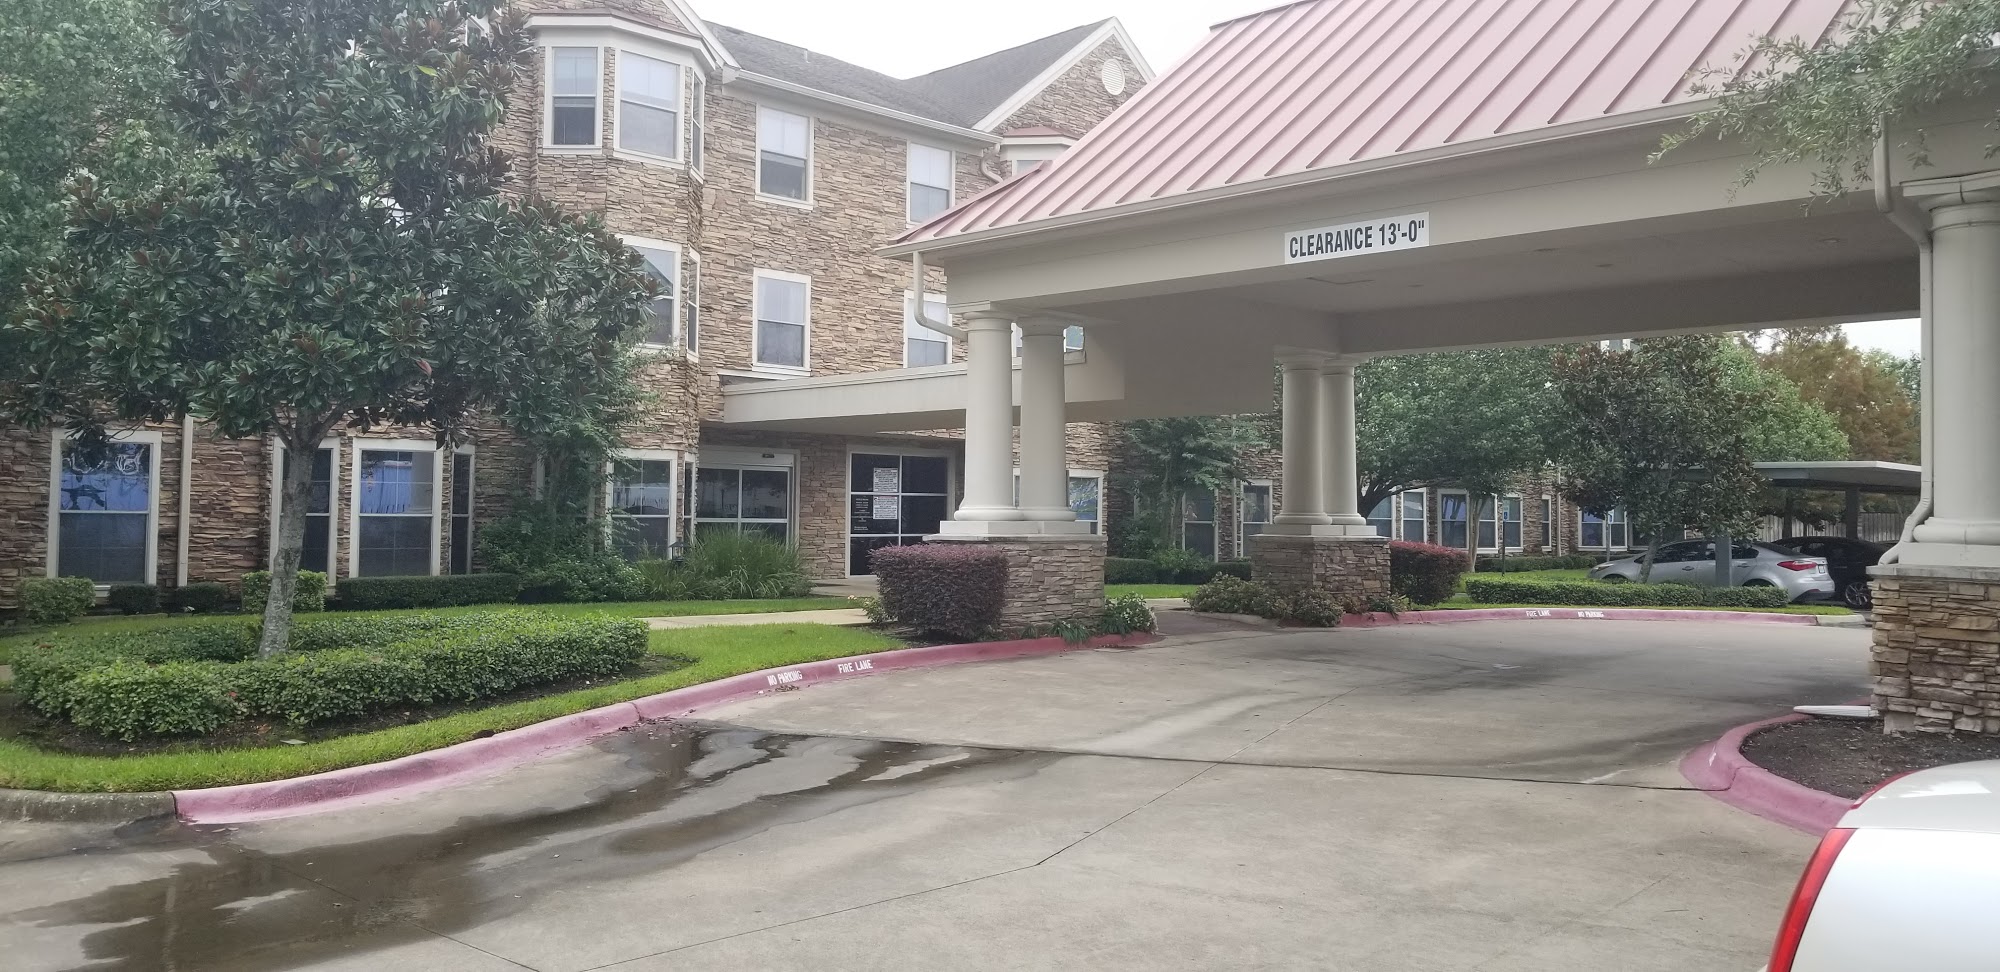 The Salvation Army Evangeline Booth Apartments